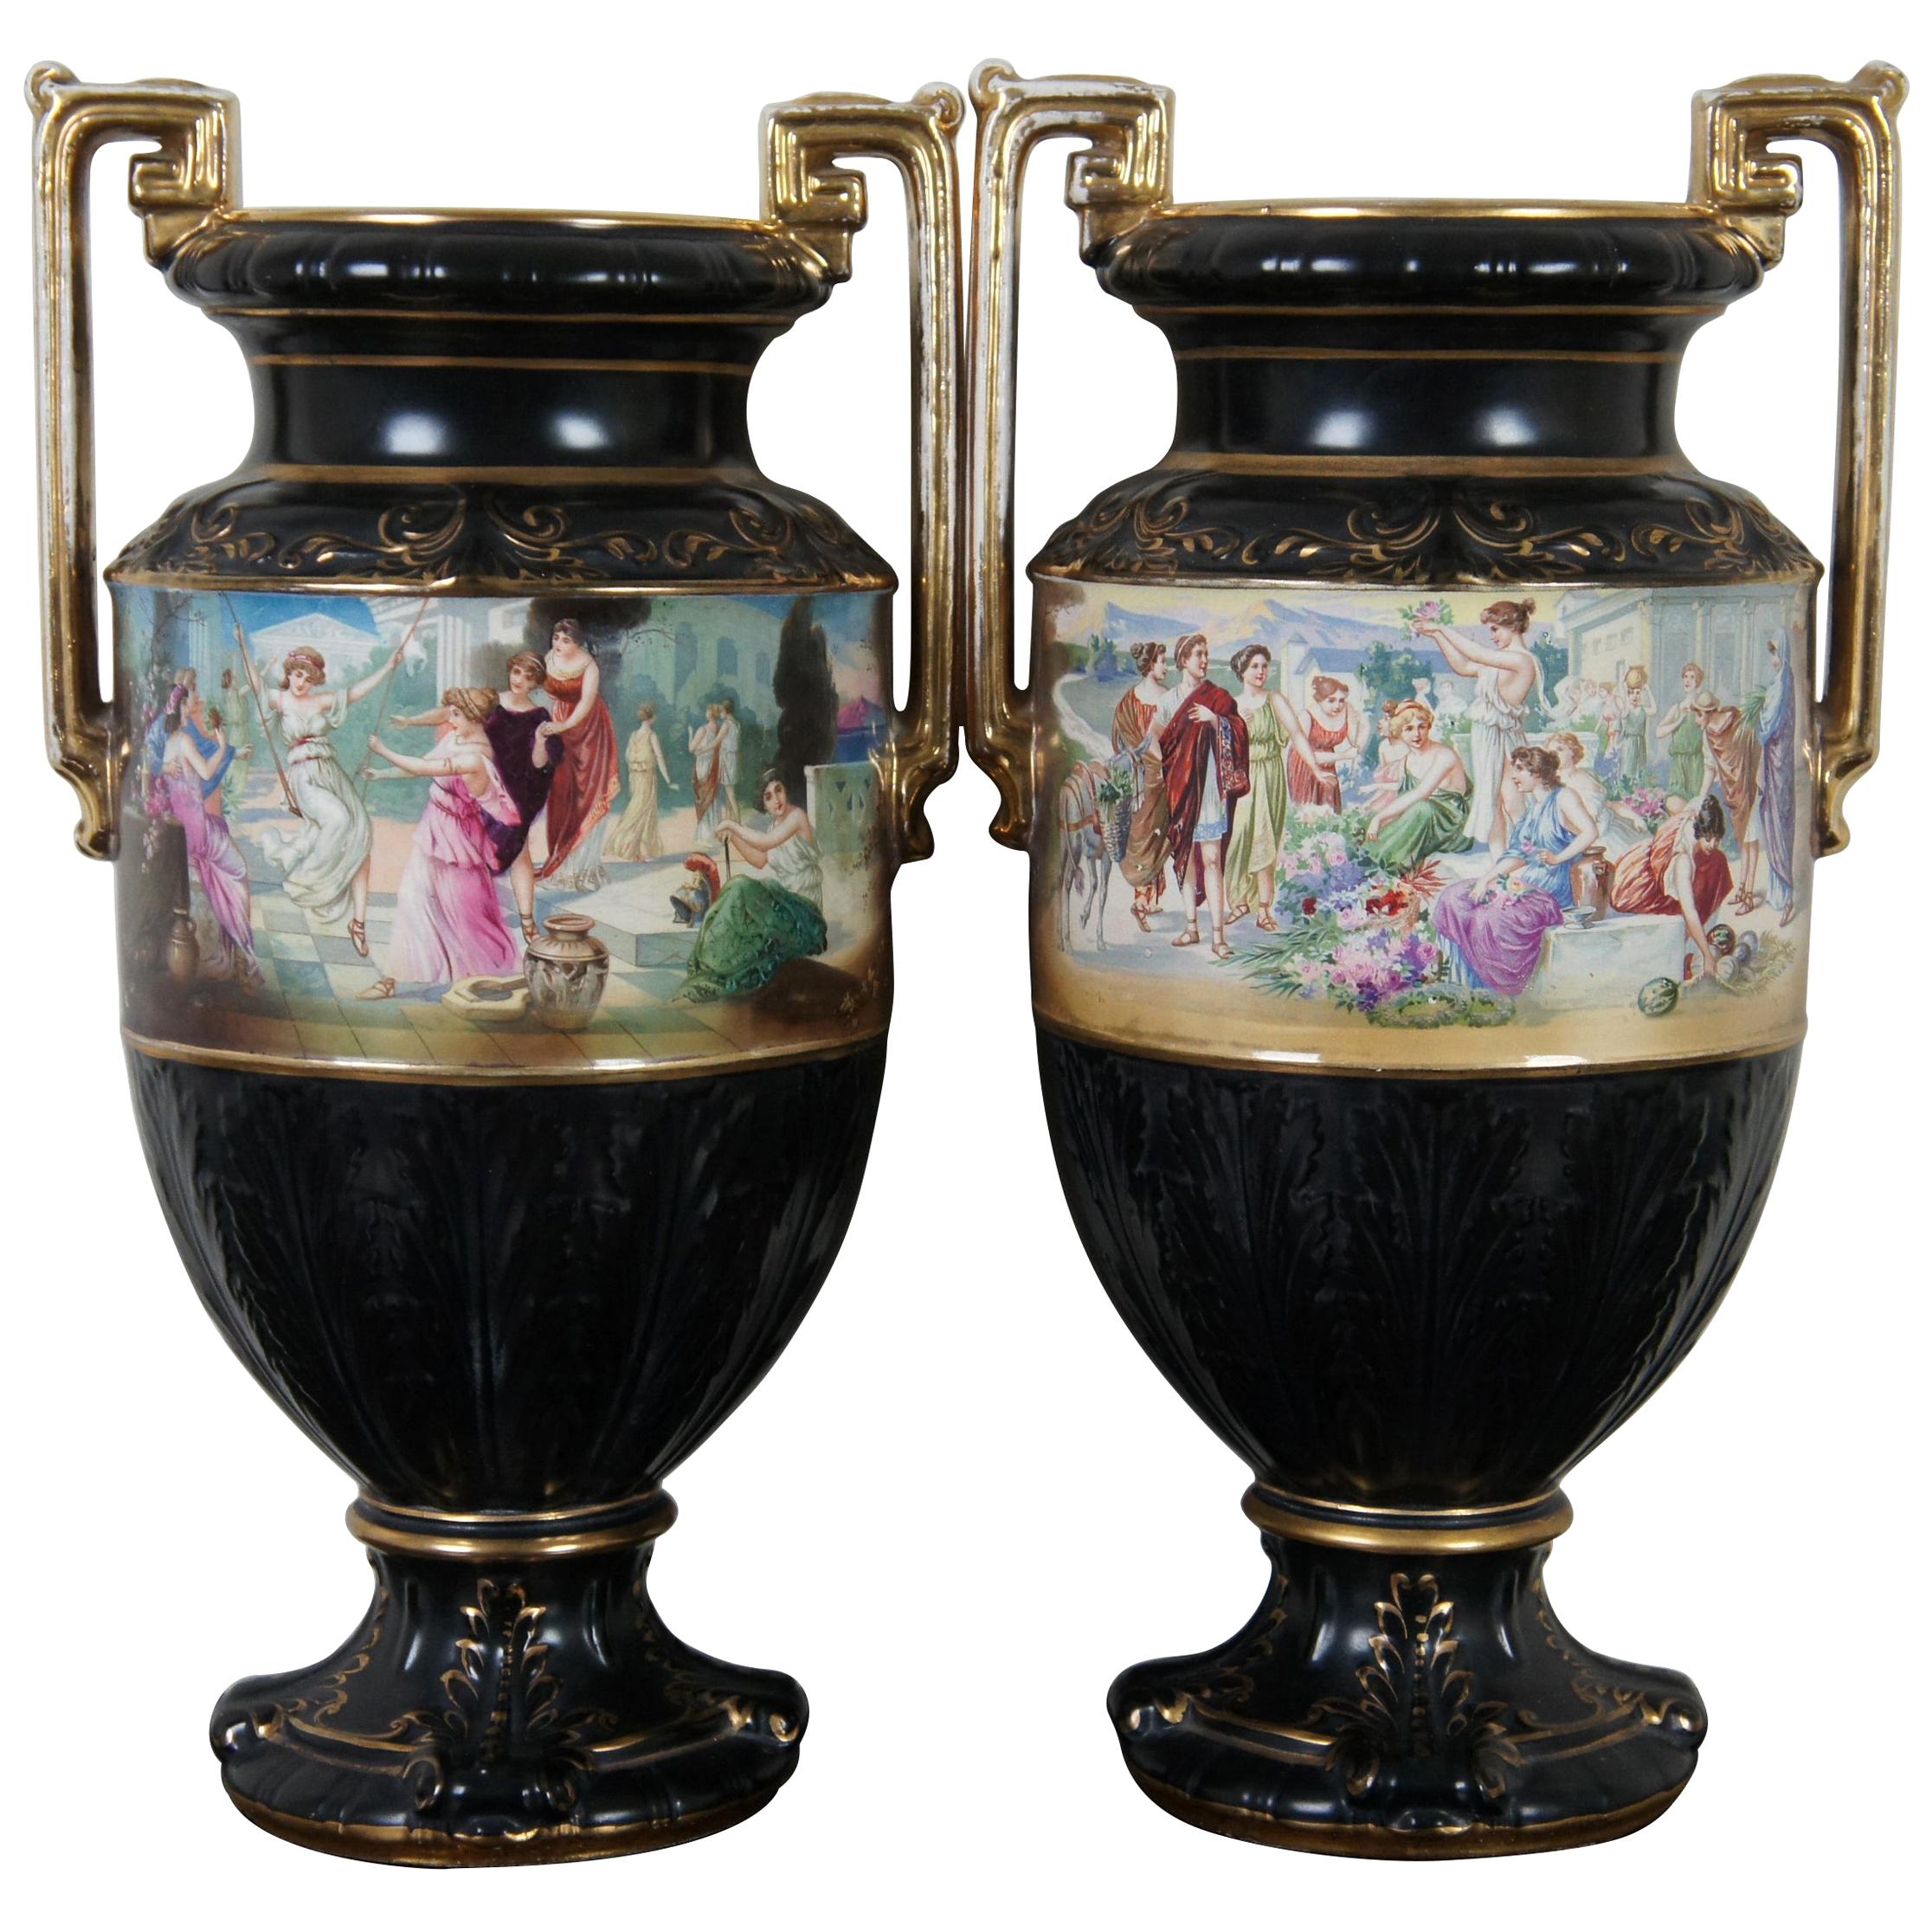 Antique Neoclassical English Black & Gold Grecian Painted Mantel Urn Vase, Pair